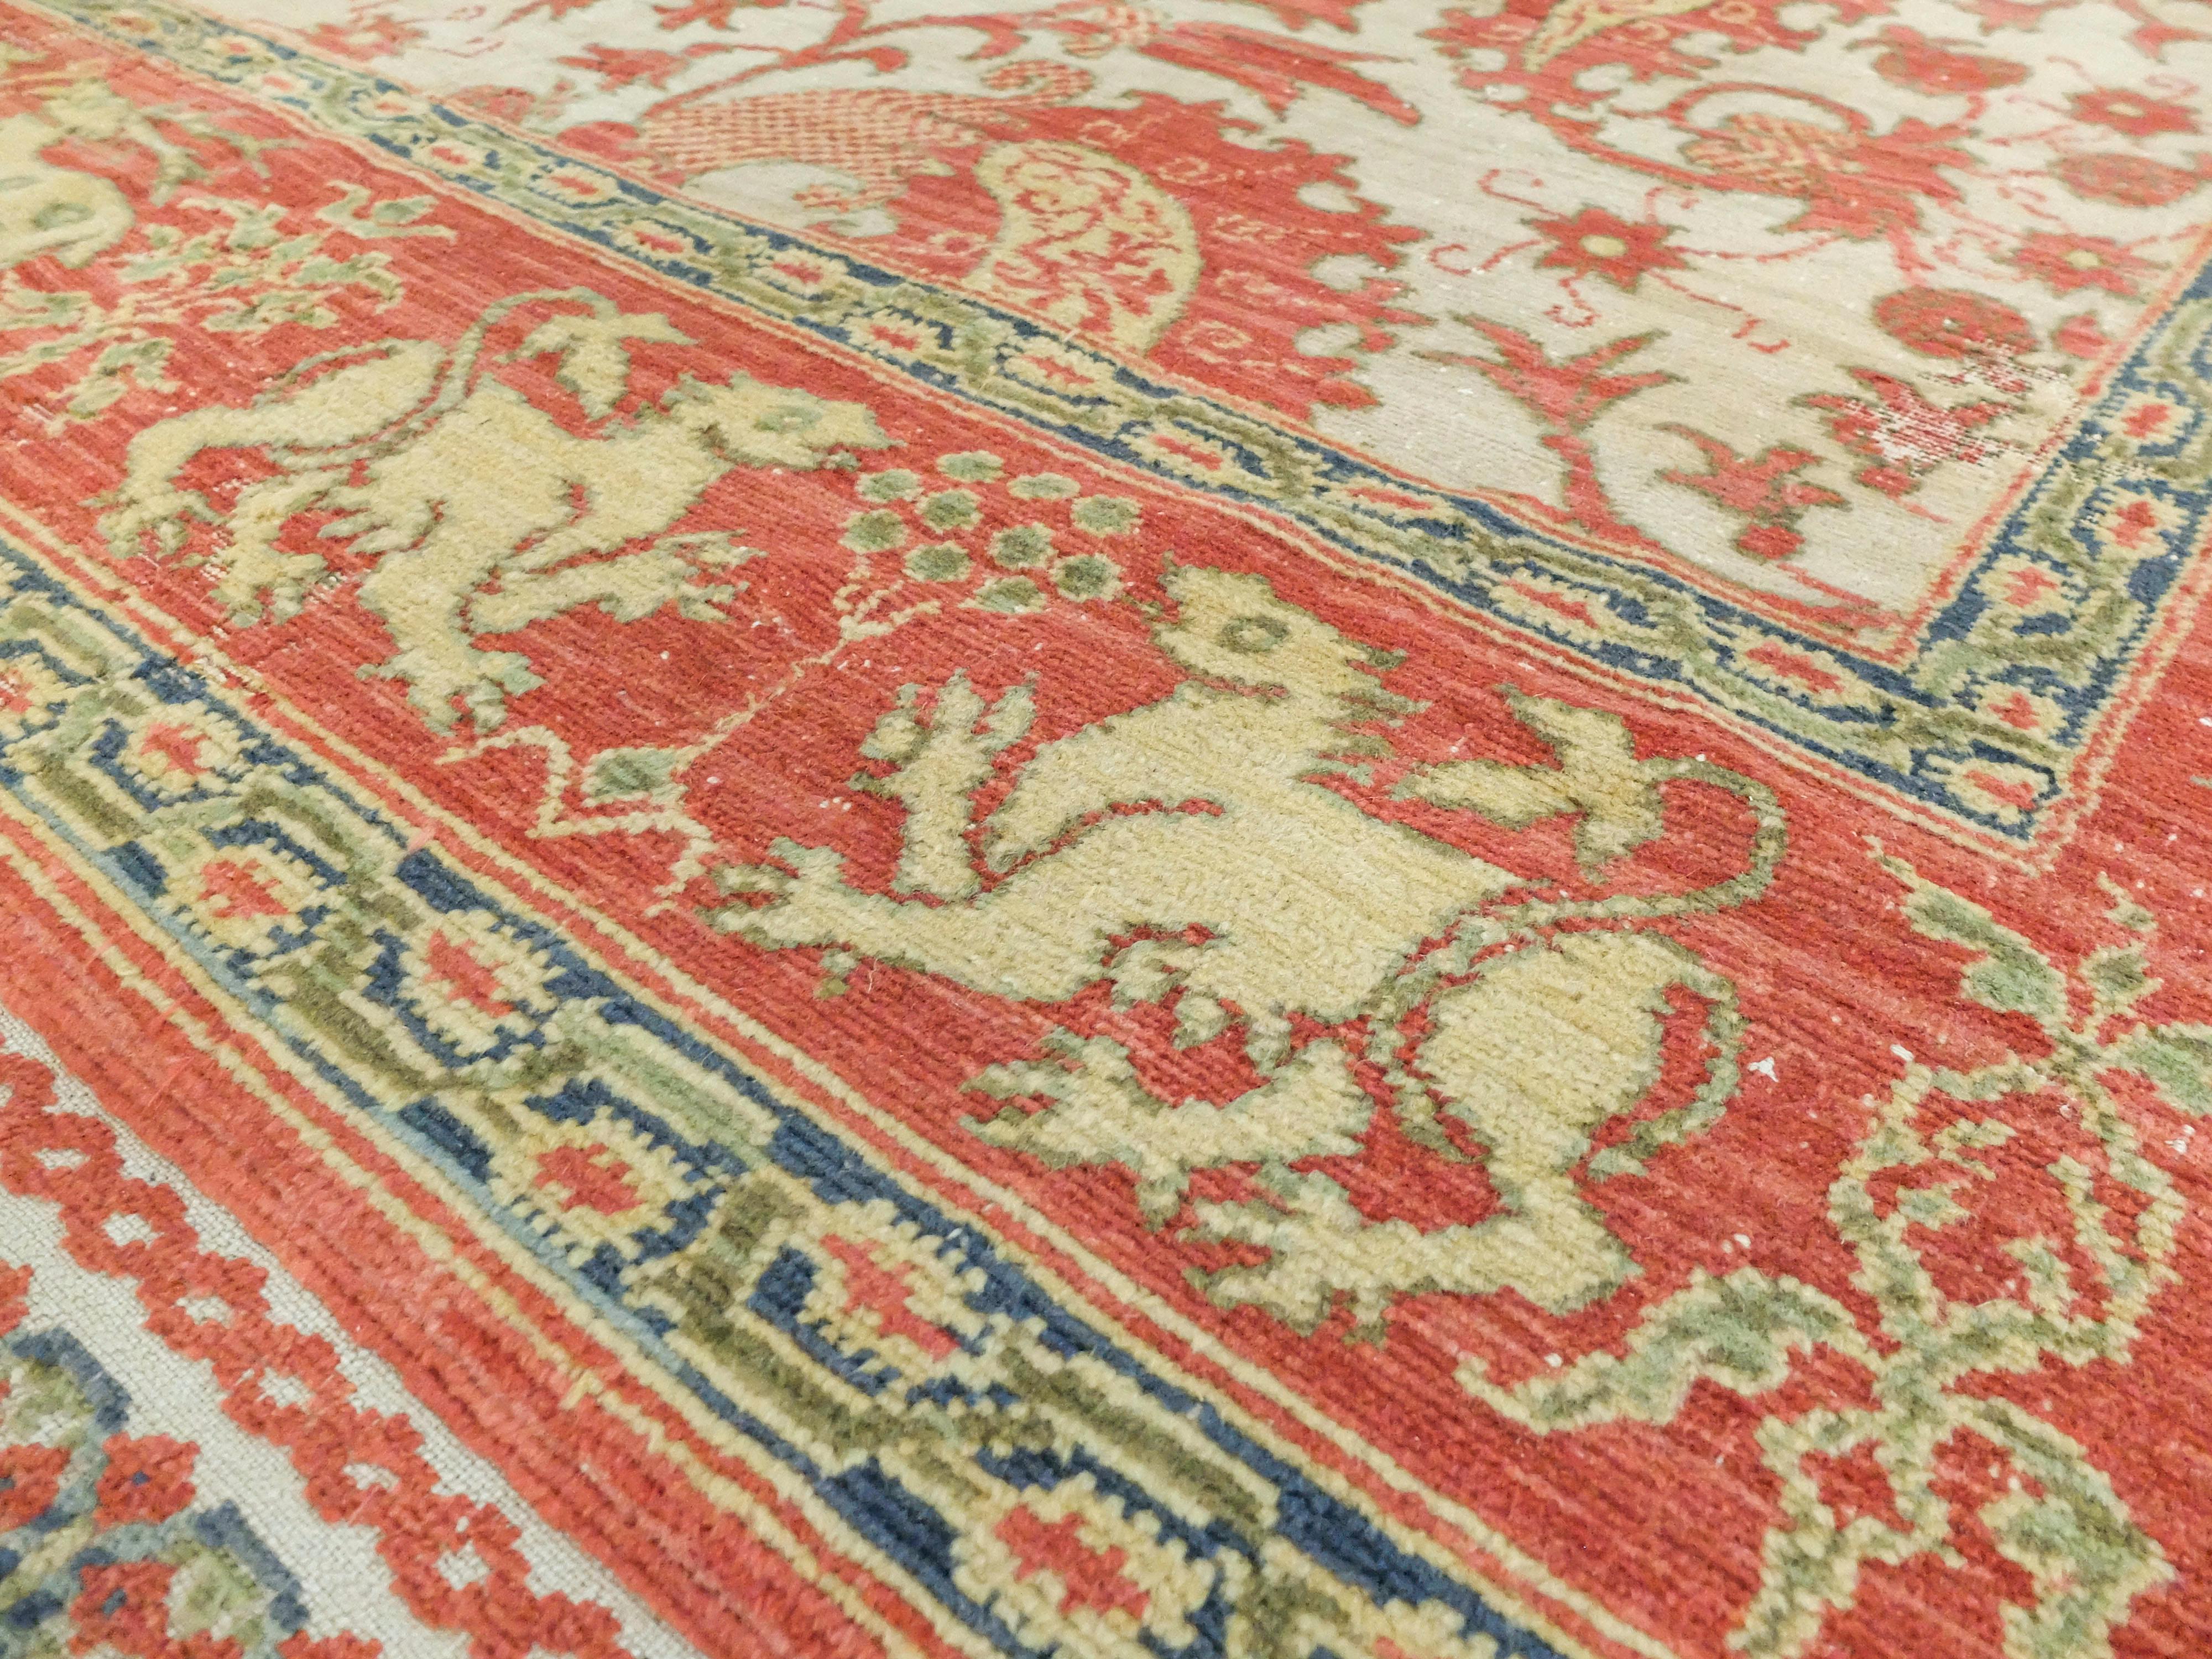 Portuguese Rug Antique, c. 1800s In Good Condition For Sale In Los Angeles, CA